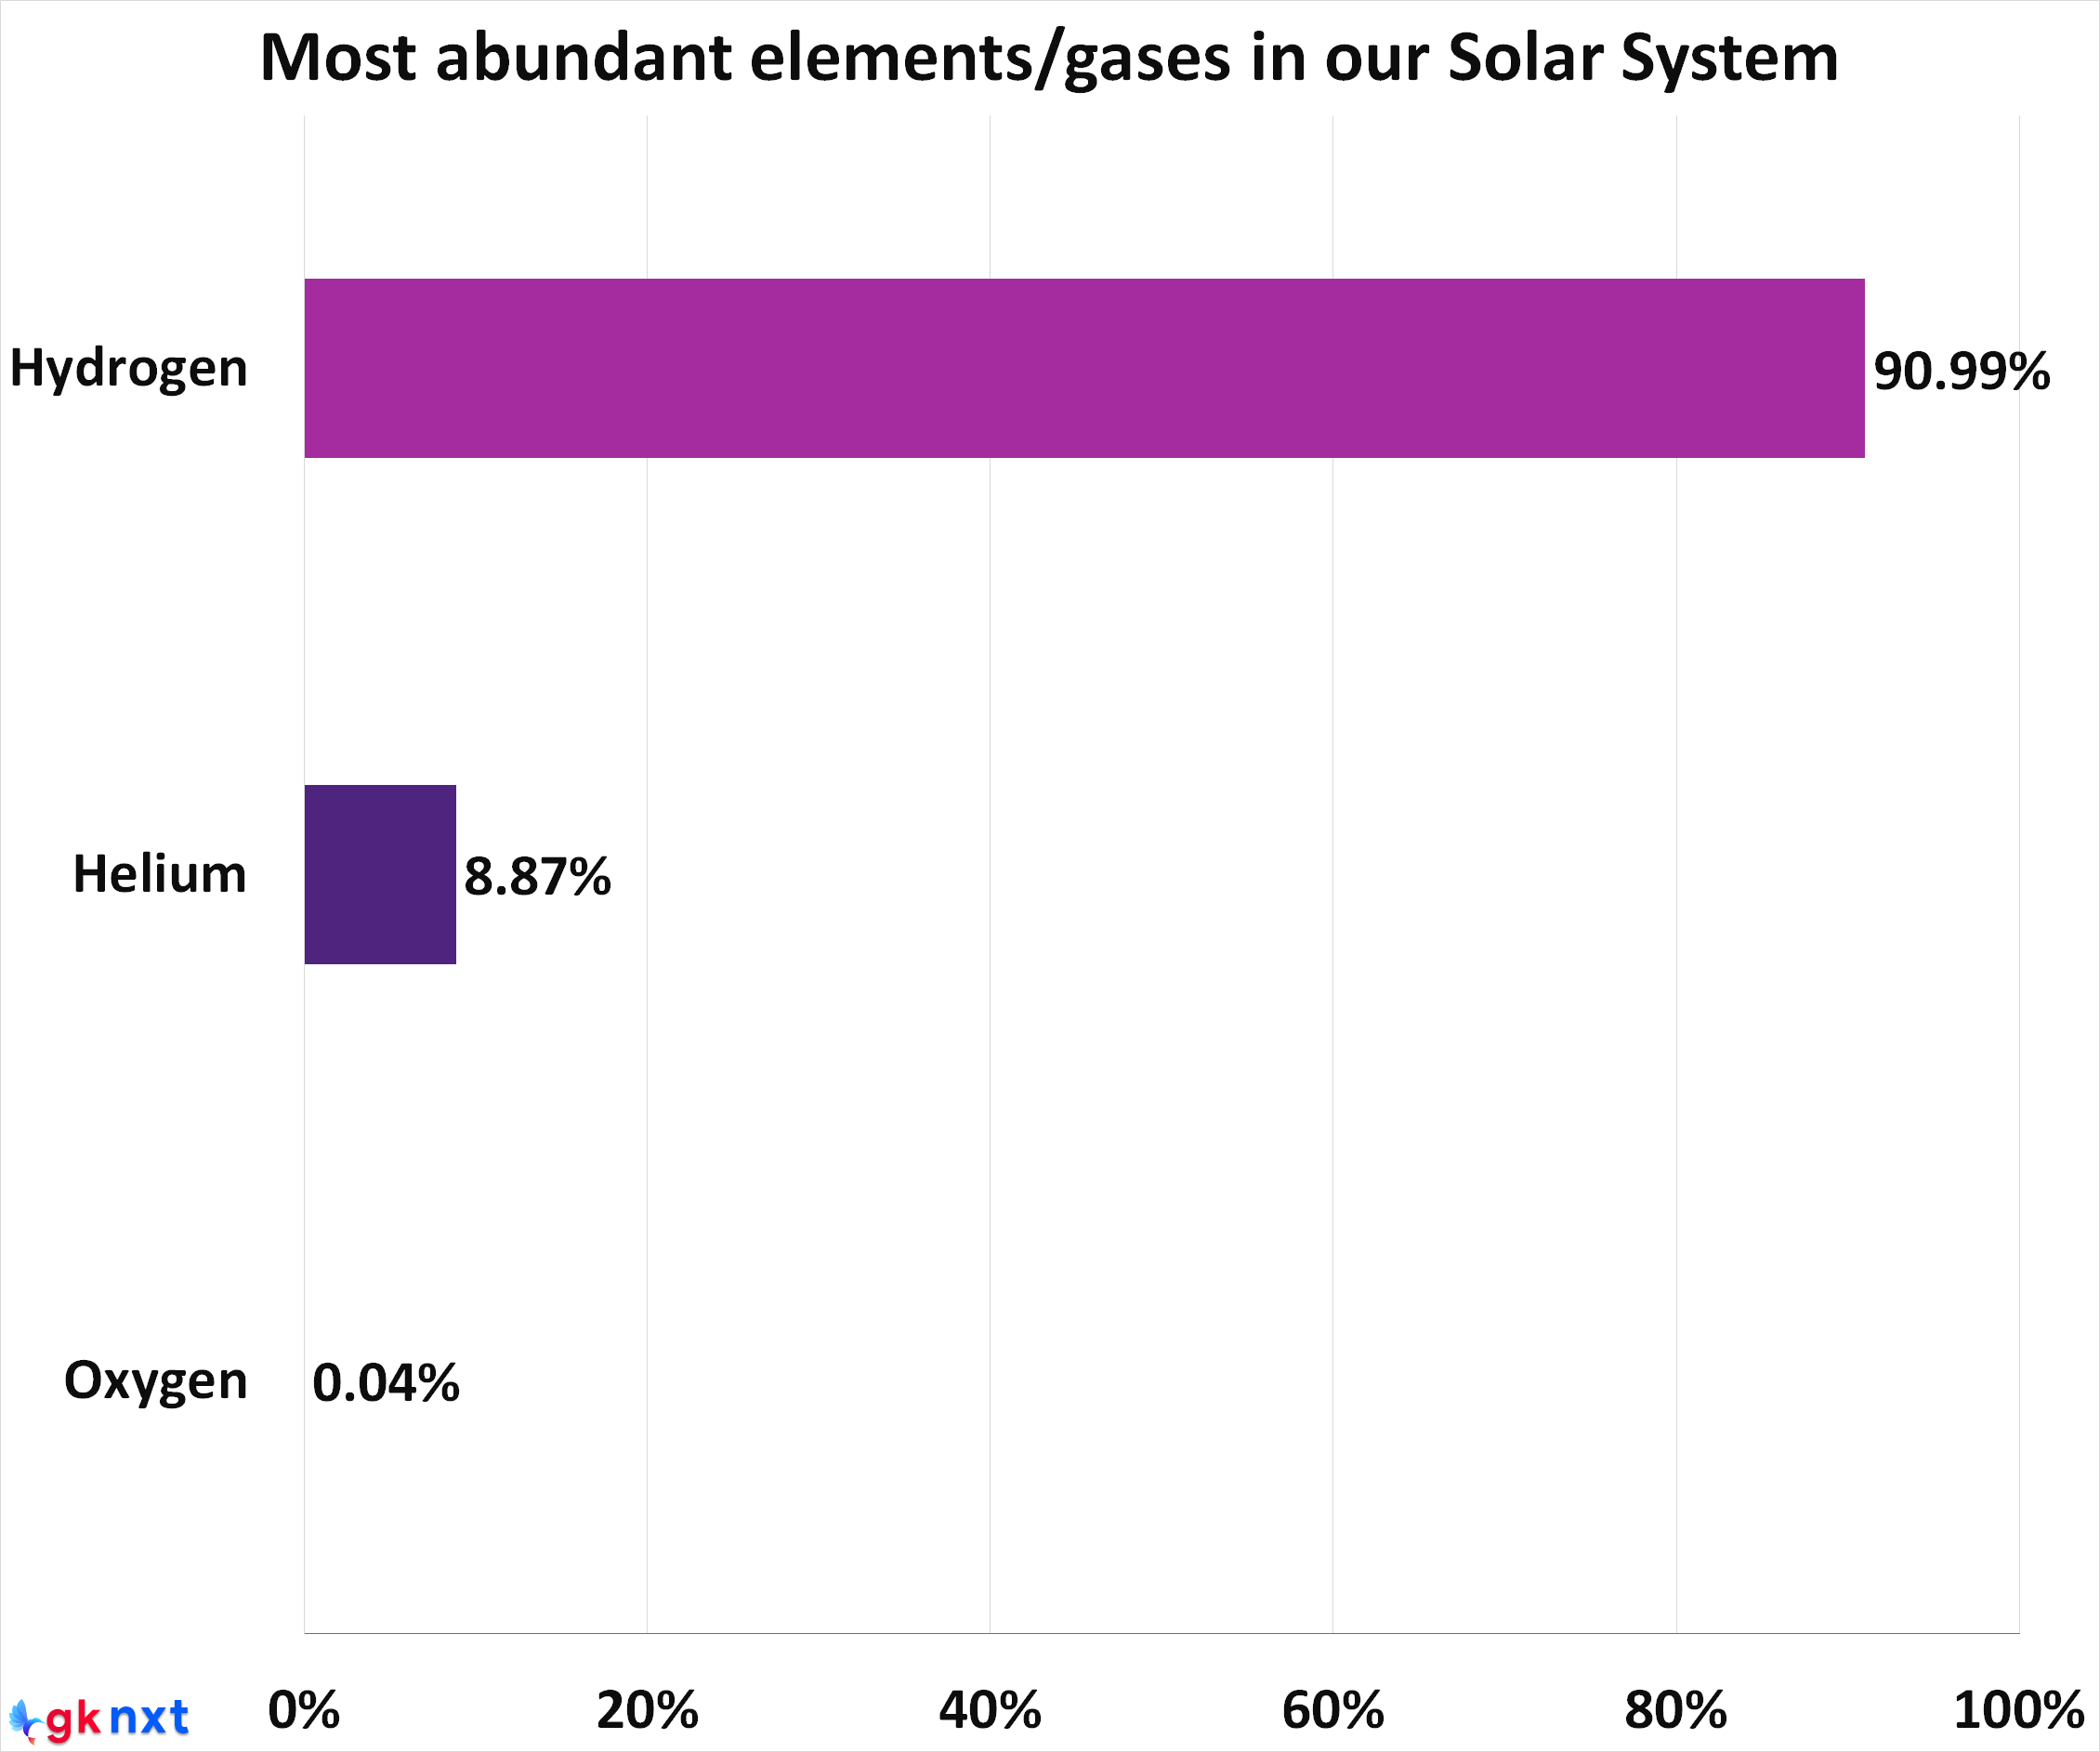 Top 3 most abundant elements in the solar system